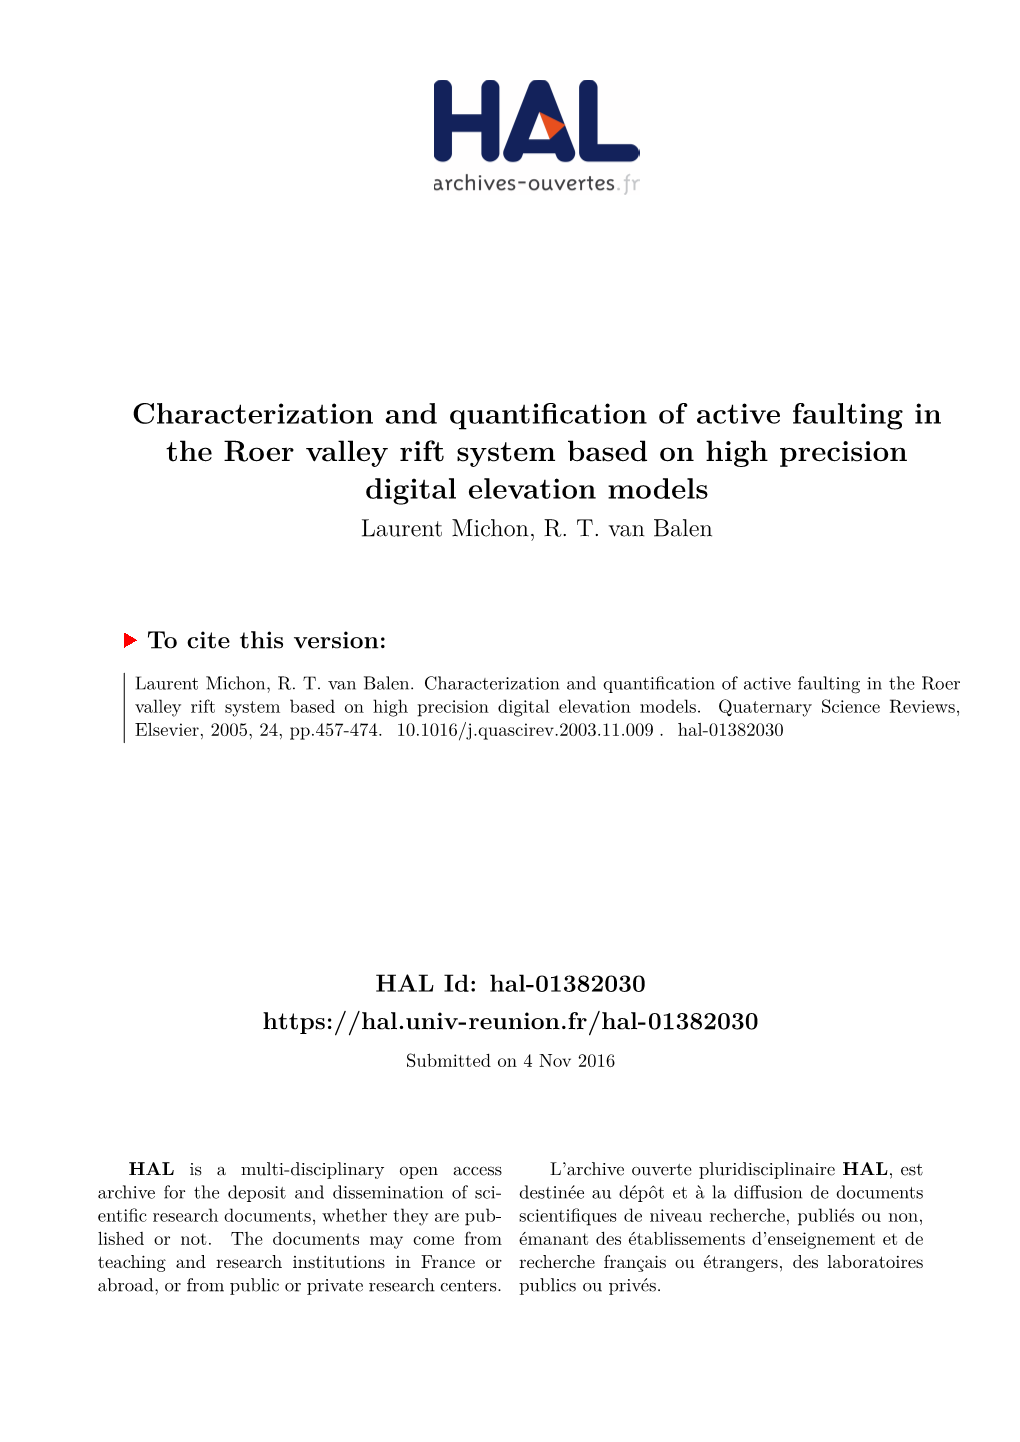 Characterization and Quantification of Active Faulting in the Roer Valley Rift System Based on High Precision Digital Elevation Models Laurent Michon, R